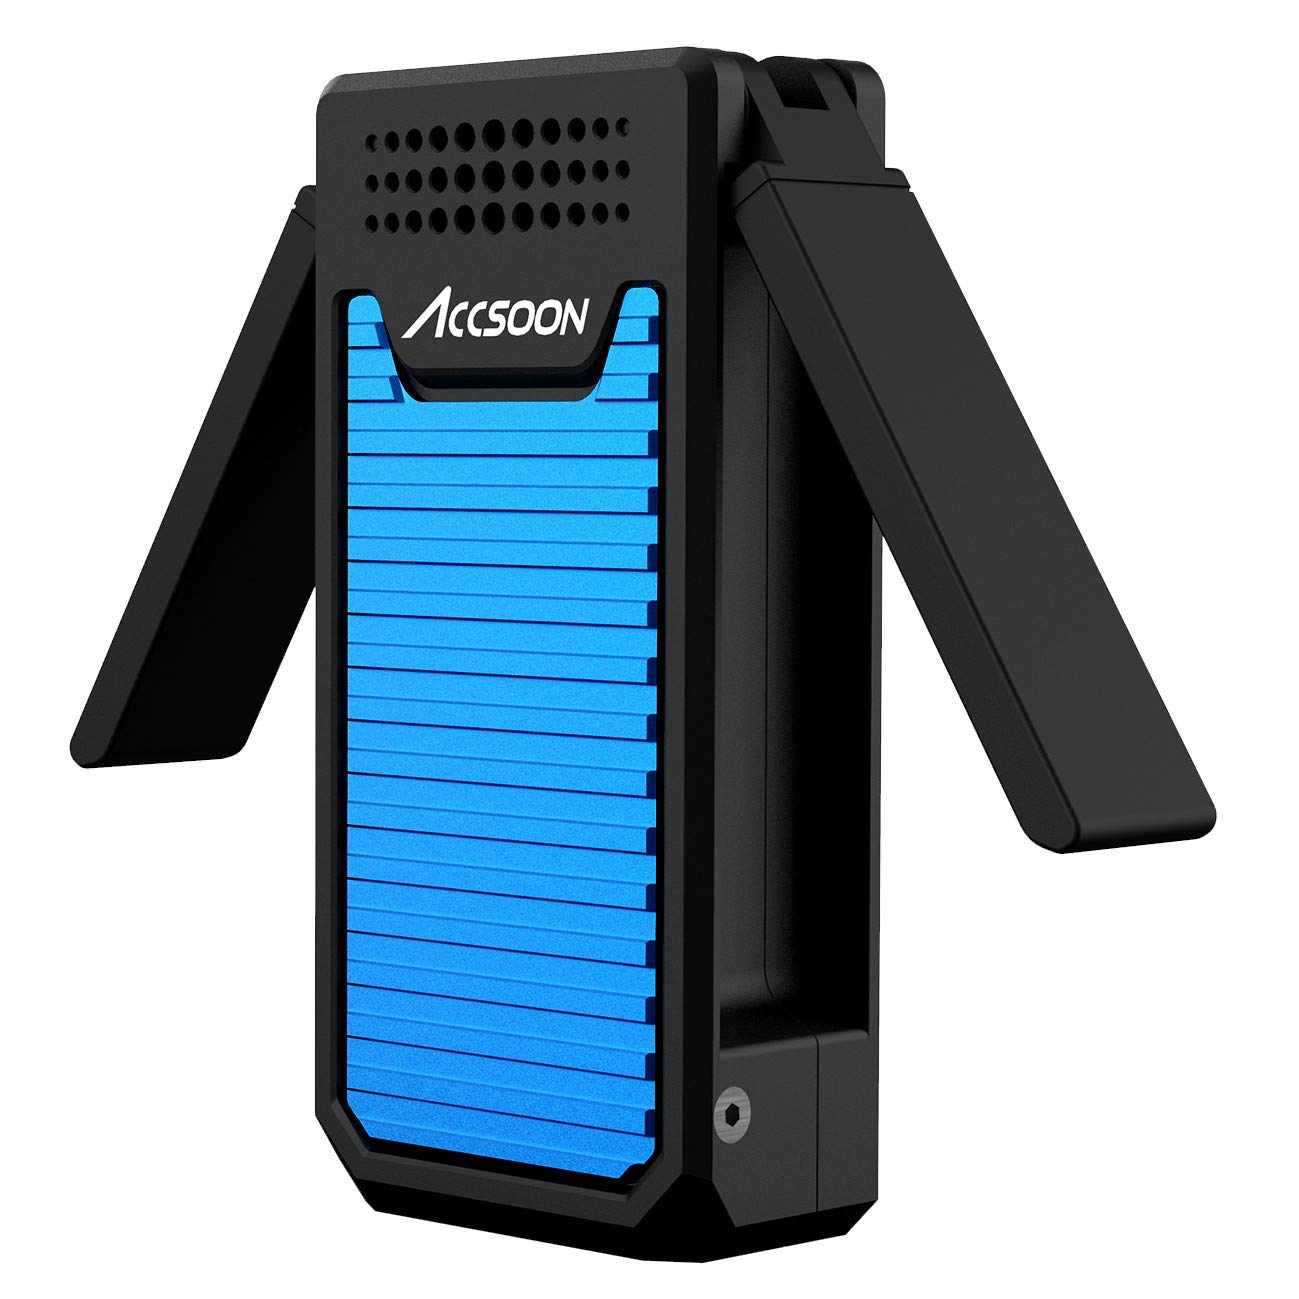 Accsoon CineEye Air 5 GHz Wireless Video Transmitter for up to 2 Mobile Devices (CINEEYEAIR)